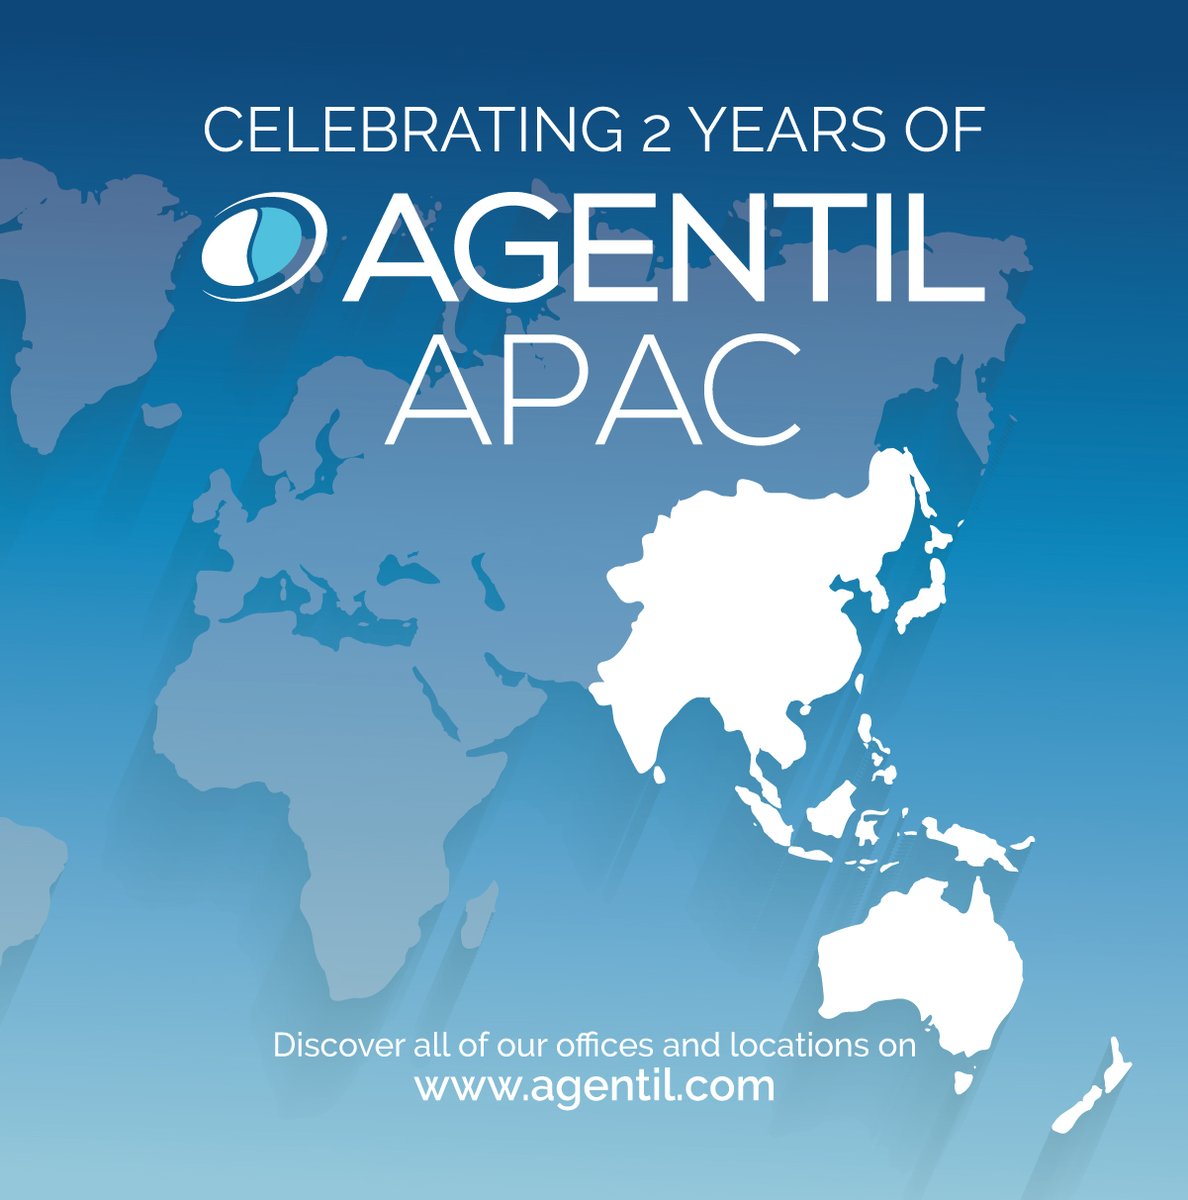 When expanding, we clearly understood the importance of being present in the Asia-Pacific region. AGENTIL APAC and its team members are now proudly celebrating their second year. 

#AGENTIL #IT #Business #Celebration #APAC #APACRegion #InformationTechnology #Asia